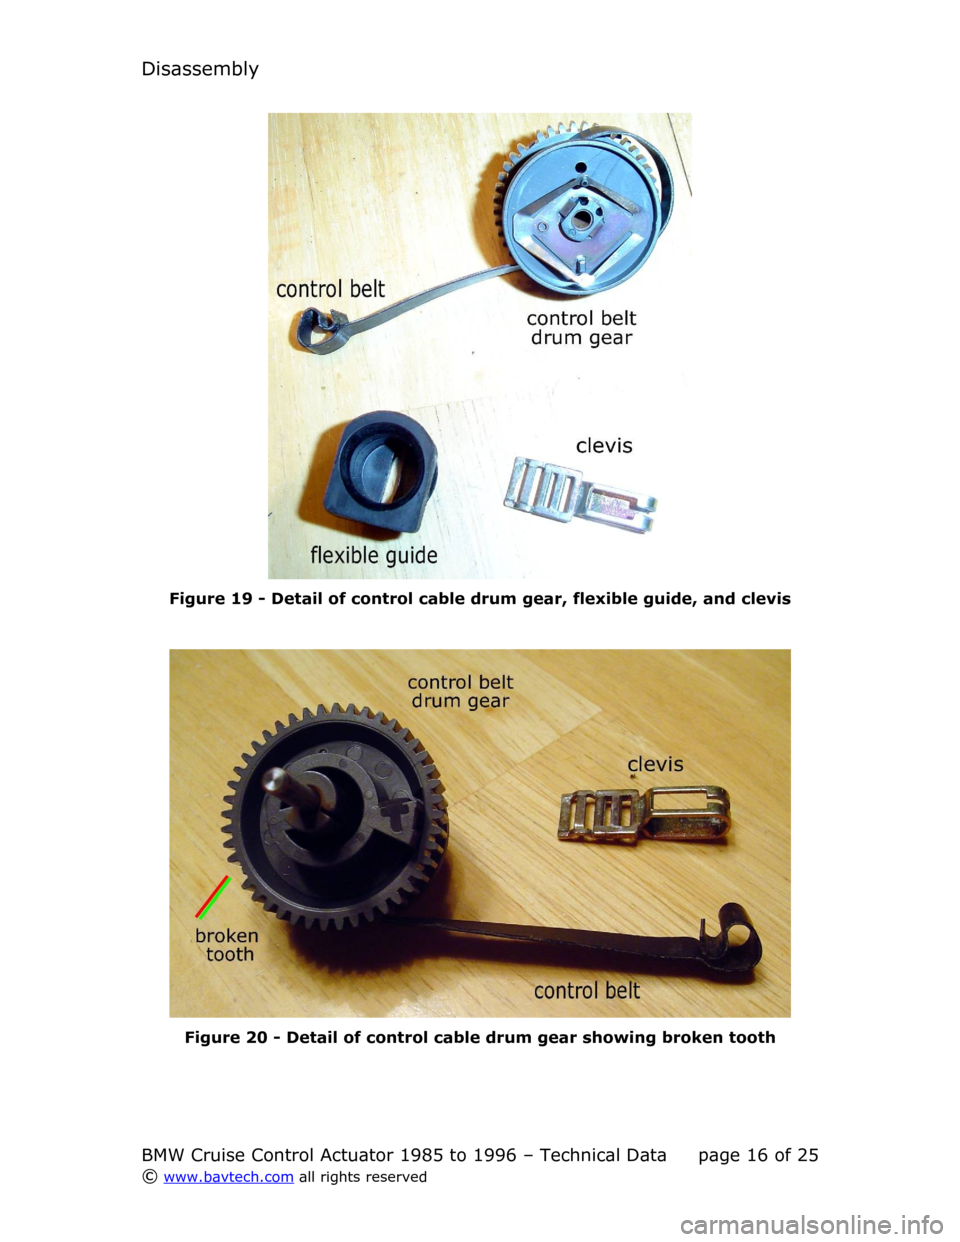 BMW 5 SERIES 1988 E34 Cruise Control Acutator Disassembly
Figure  19  - Detail of control cable drum gear, flexible guide, and clevis
Figure  20  - Detail of control cable drum gear showing broken tooth
BMW Cruise Control Actuator 1985 to 1996 �